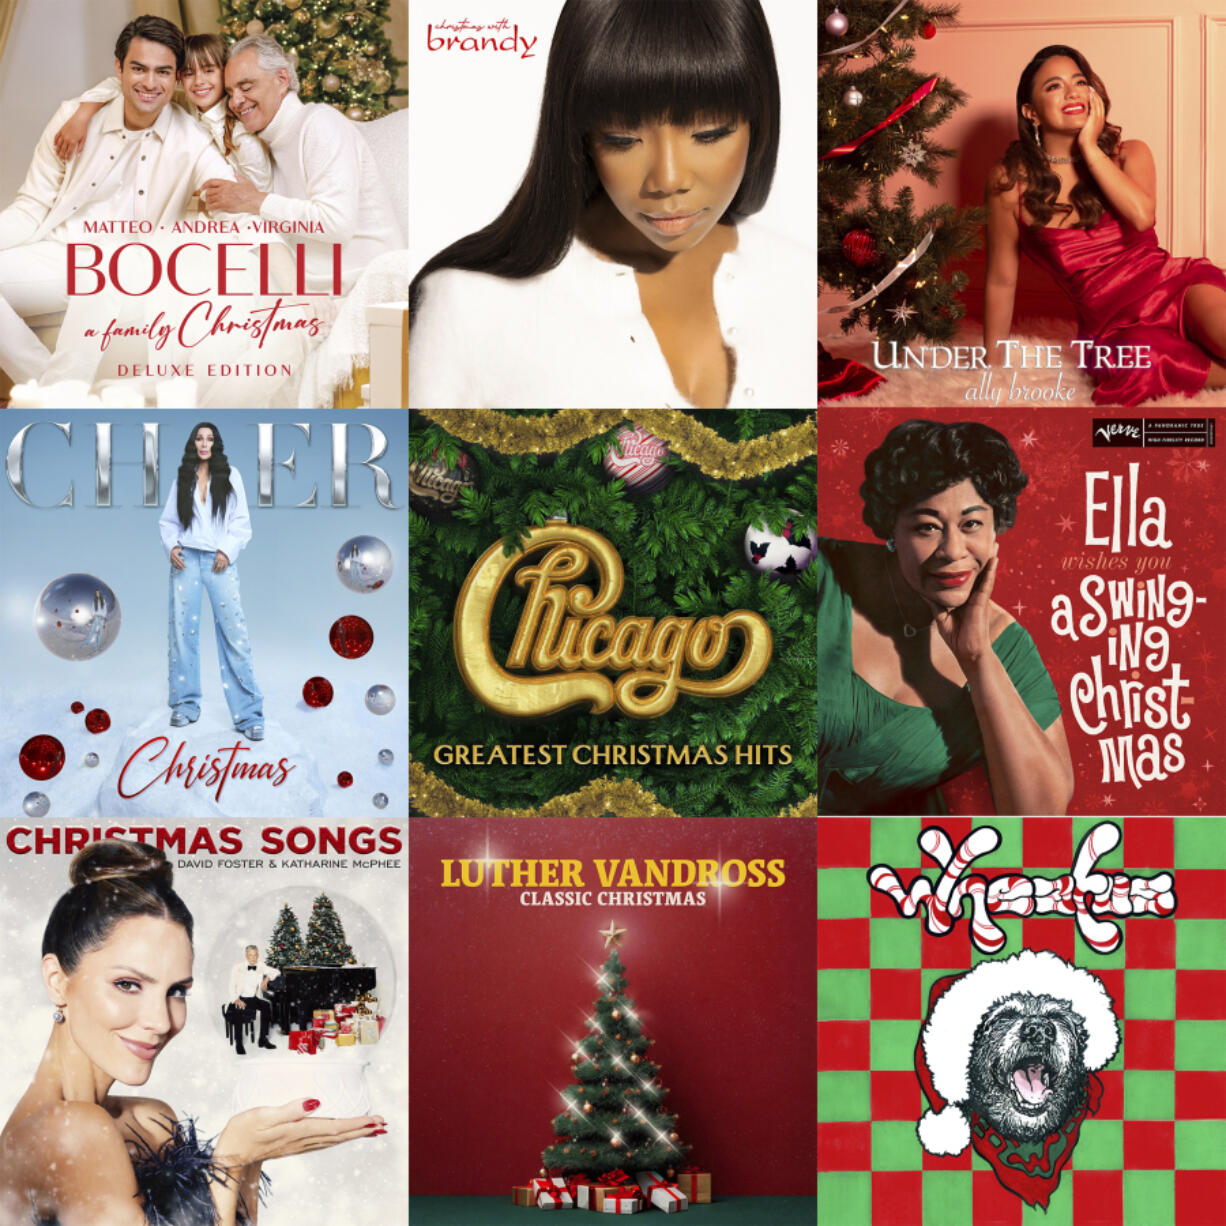 &ldquo;A Family Christmas&rdquo; by Andrea Bocelli with Matteo and Virginia Bocelli, top row from left, &ldquo;Christmas with Brandy&rdquo; by Brandy, &ldquo;Under the Tree&rdquo; by Ally Brooke, second row from left, &ldquo;Christmas&rdquo; by Cher, &ldquo;Chicago Greatest Christmas Hits,&rdquo; &ldquo;Ella Wishes You A Swinging Christmas&rdquo; by Ella Fitzgerald, bottom row from left, &ldquo;Christmas Songs&rdquo; by David Foster and Katherine McPhee, &ldquo;Luther Vandross Classic Christmas&rdquo; and &ldquo;Just A Dirtbag Christmas&rdquo; by Wheatus.